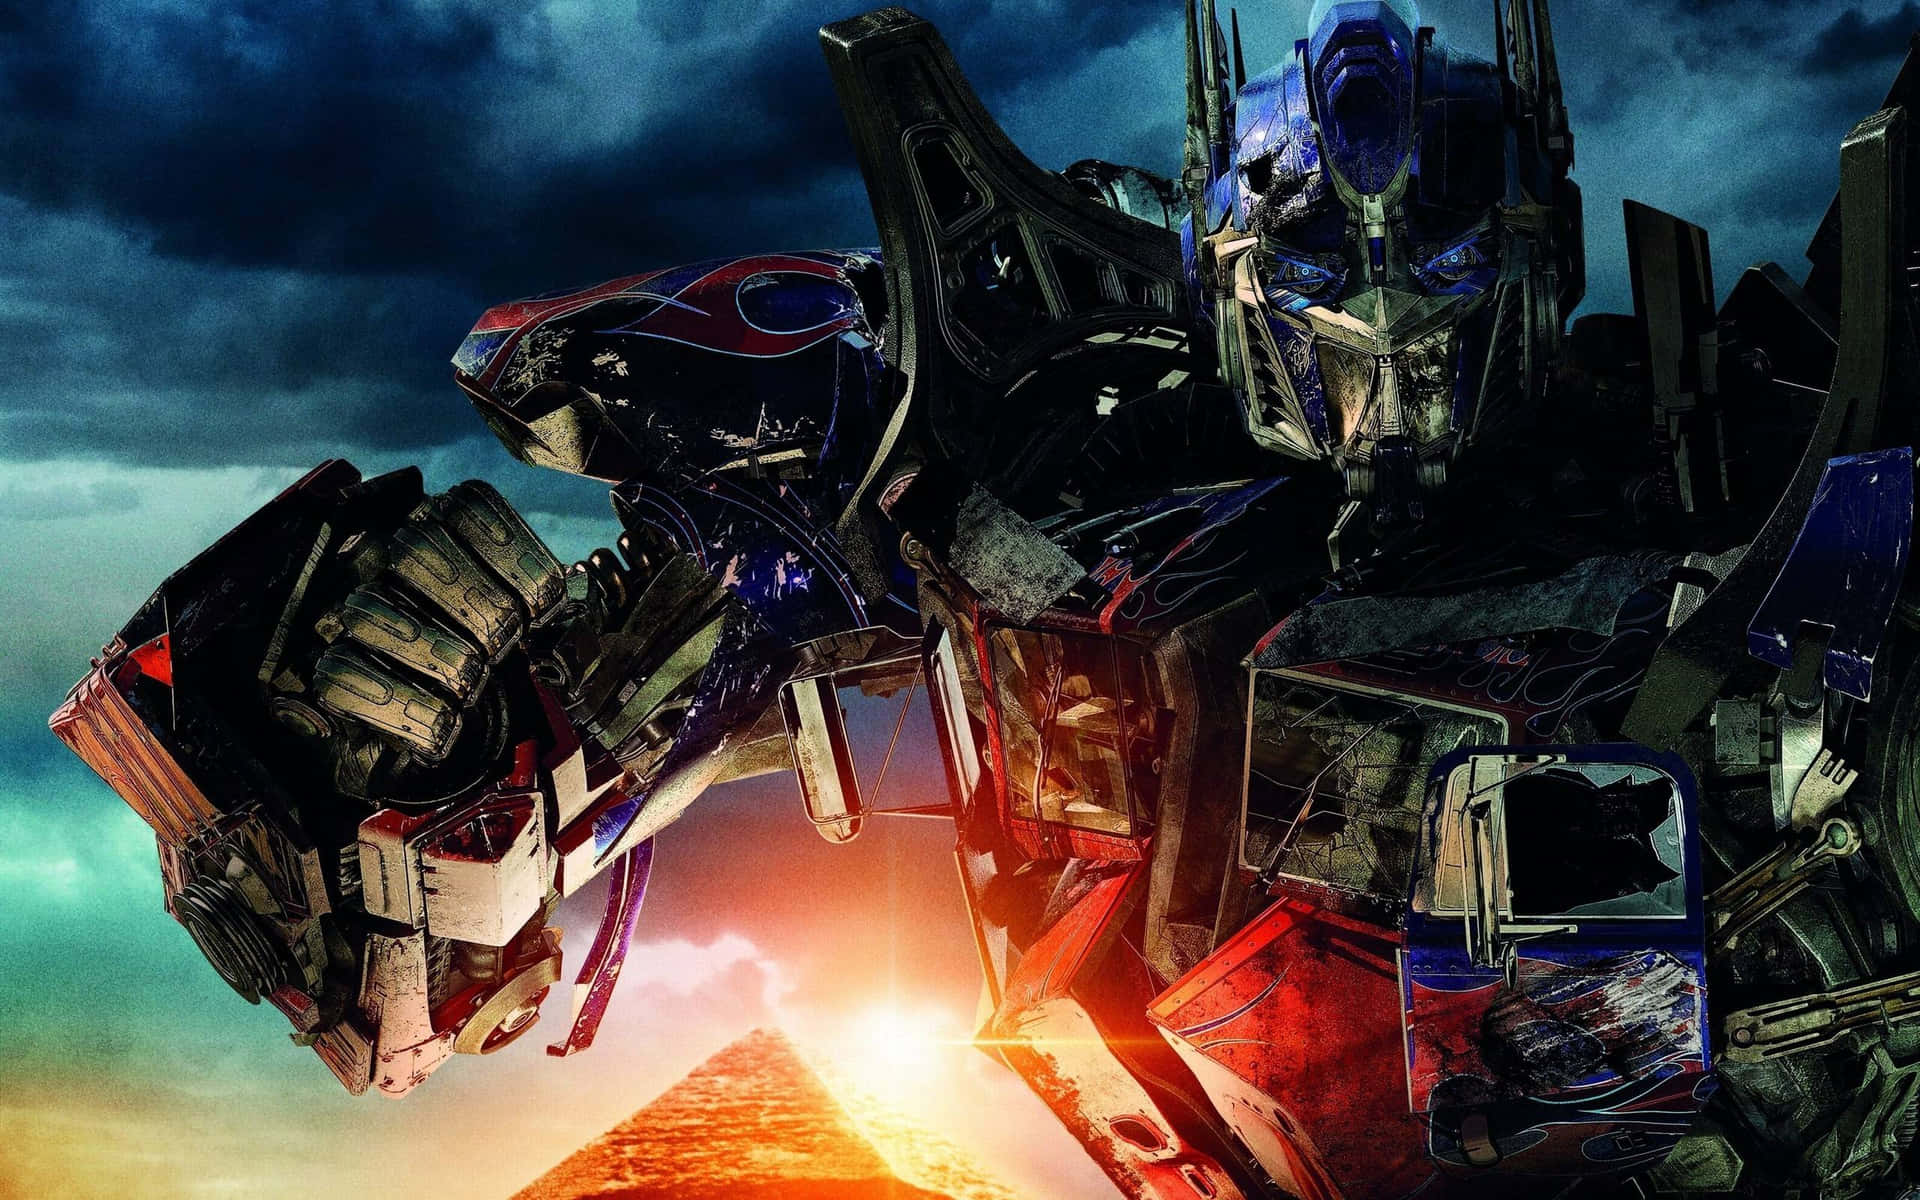 Optimus Prime, leader of the Autobots, standing proud and ready for battle